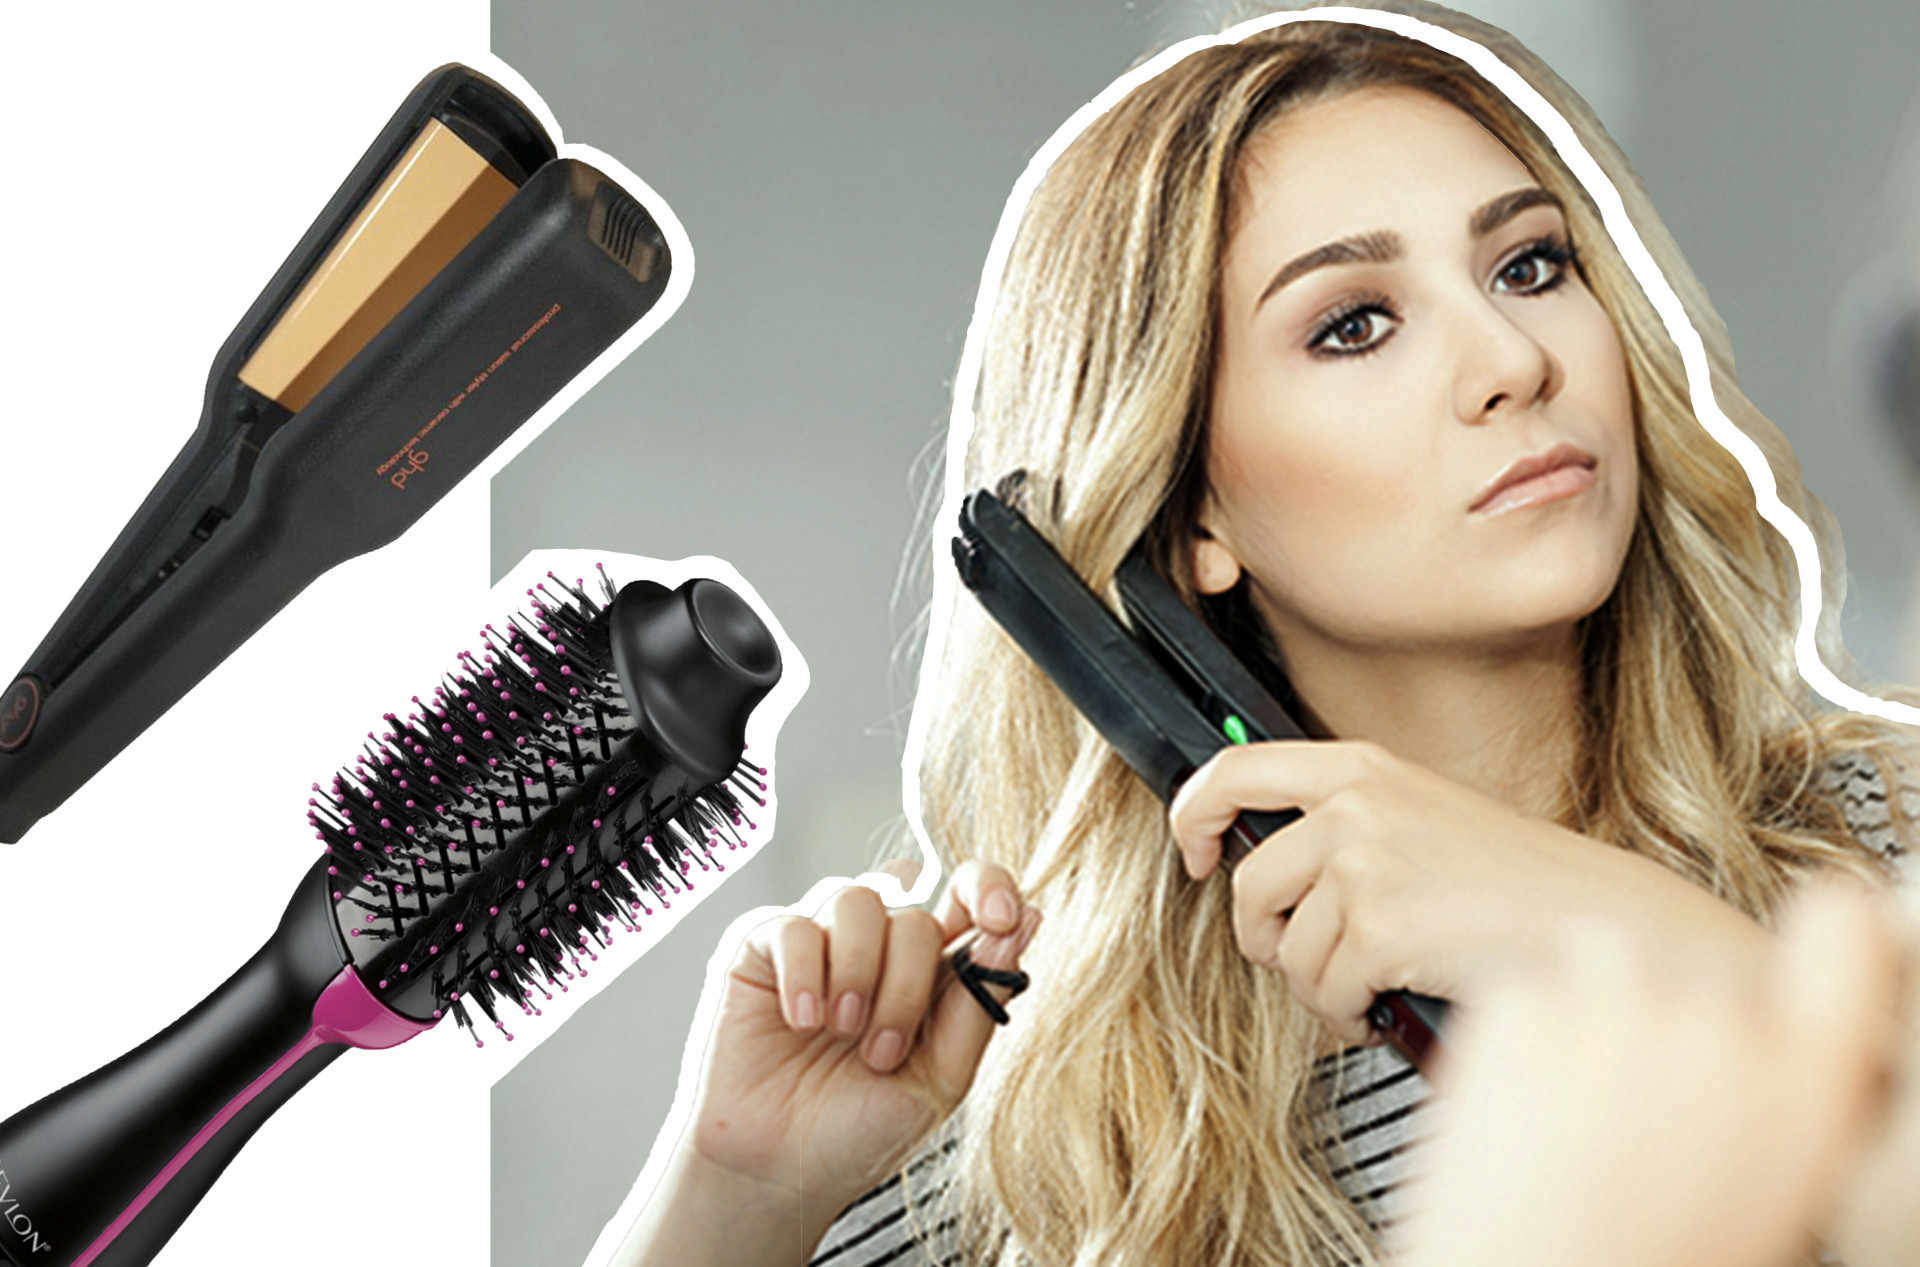 Top 5 Innovative Hair Styling Tools We Have Seen in 2020 - Voir Fashion